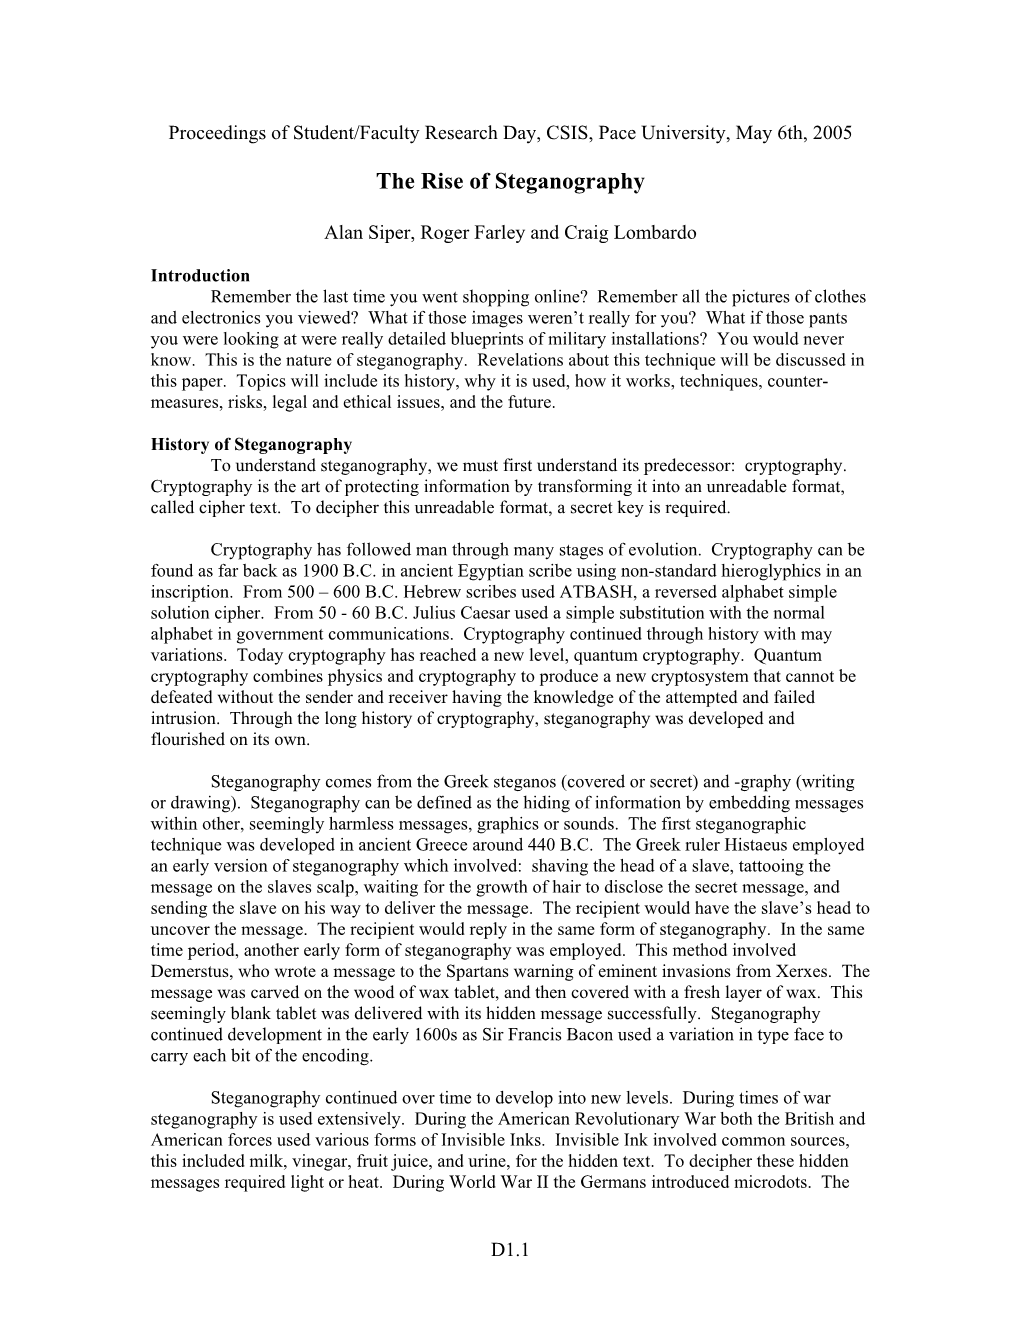 The Rise of Steganography